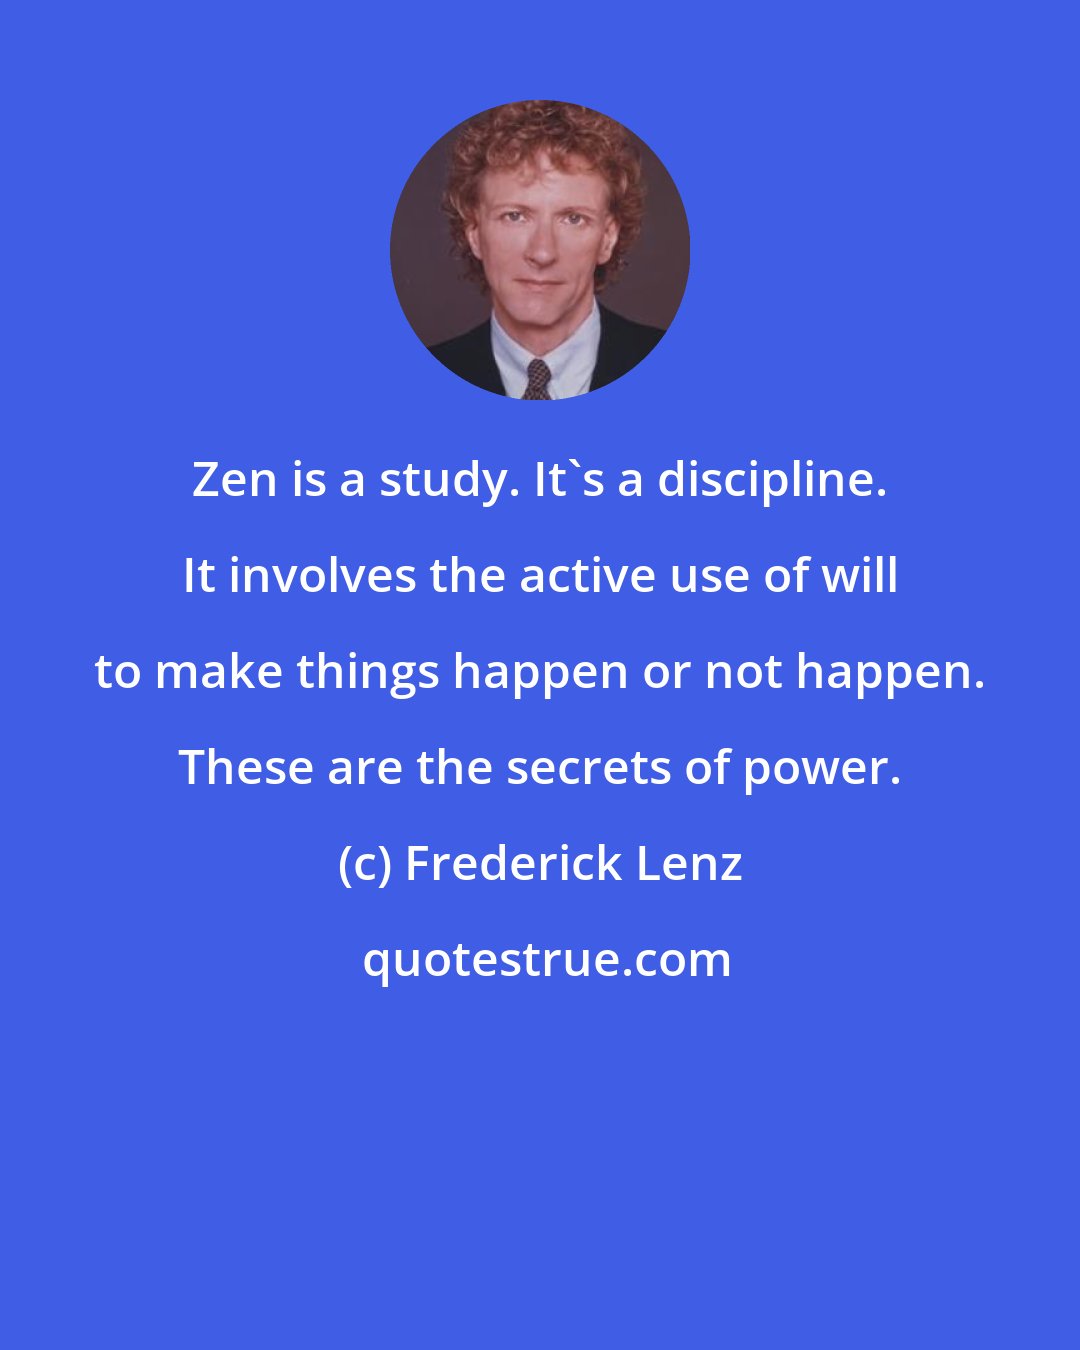 Frederick Lenz: Zen is a study. It's a discipline. It involves the active use of will to make things happen or not happen. These are the secrets of power.